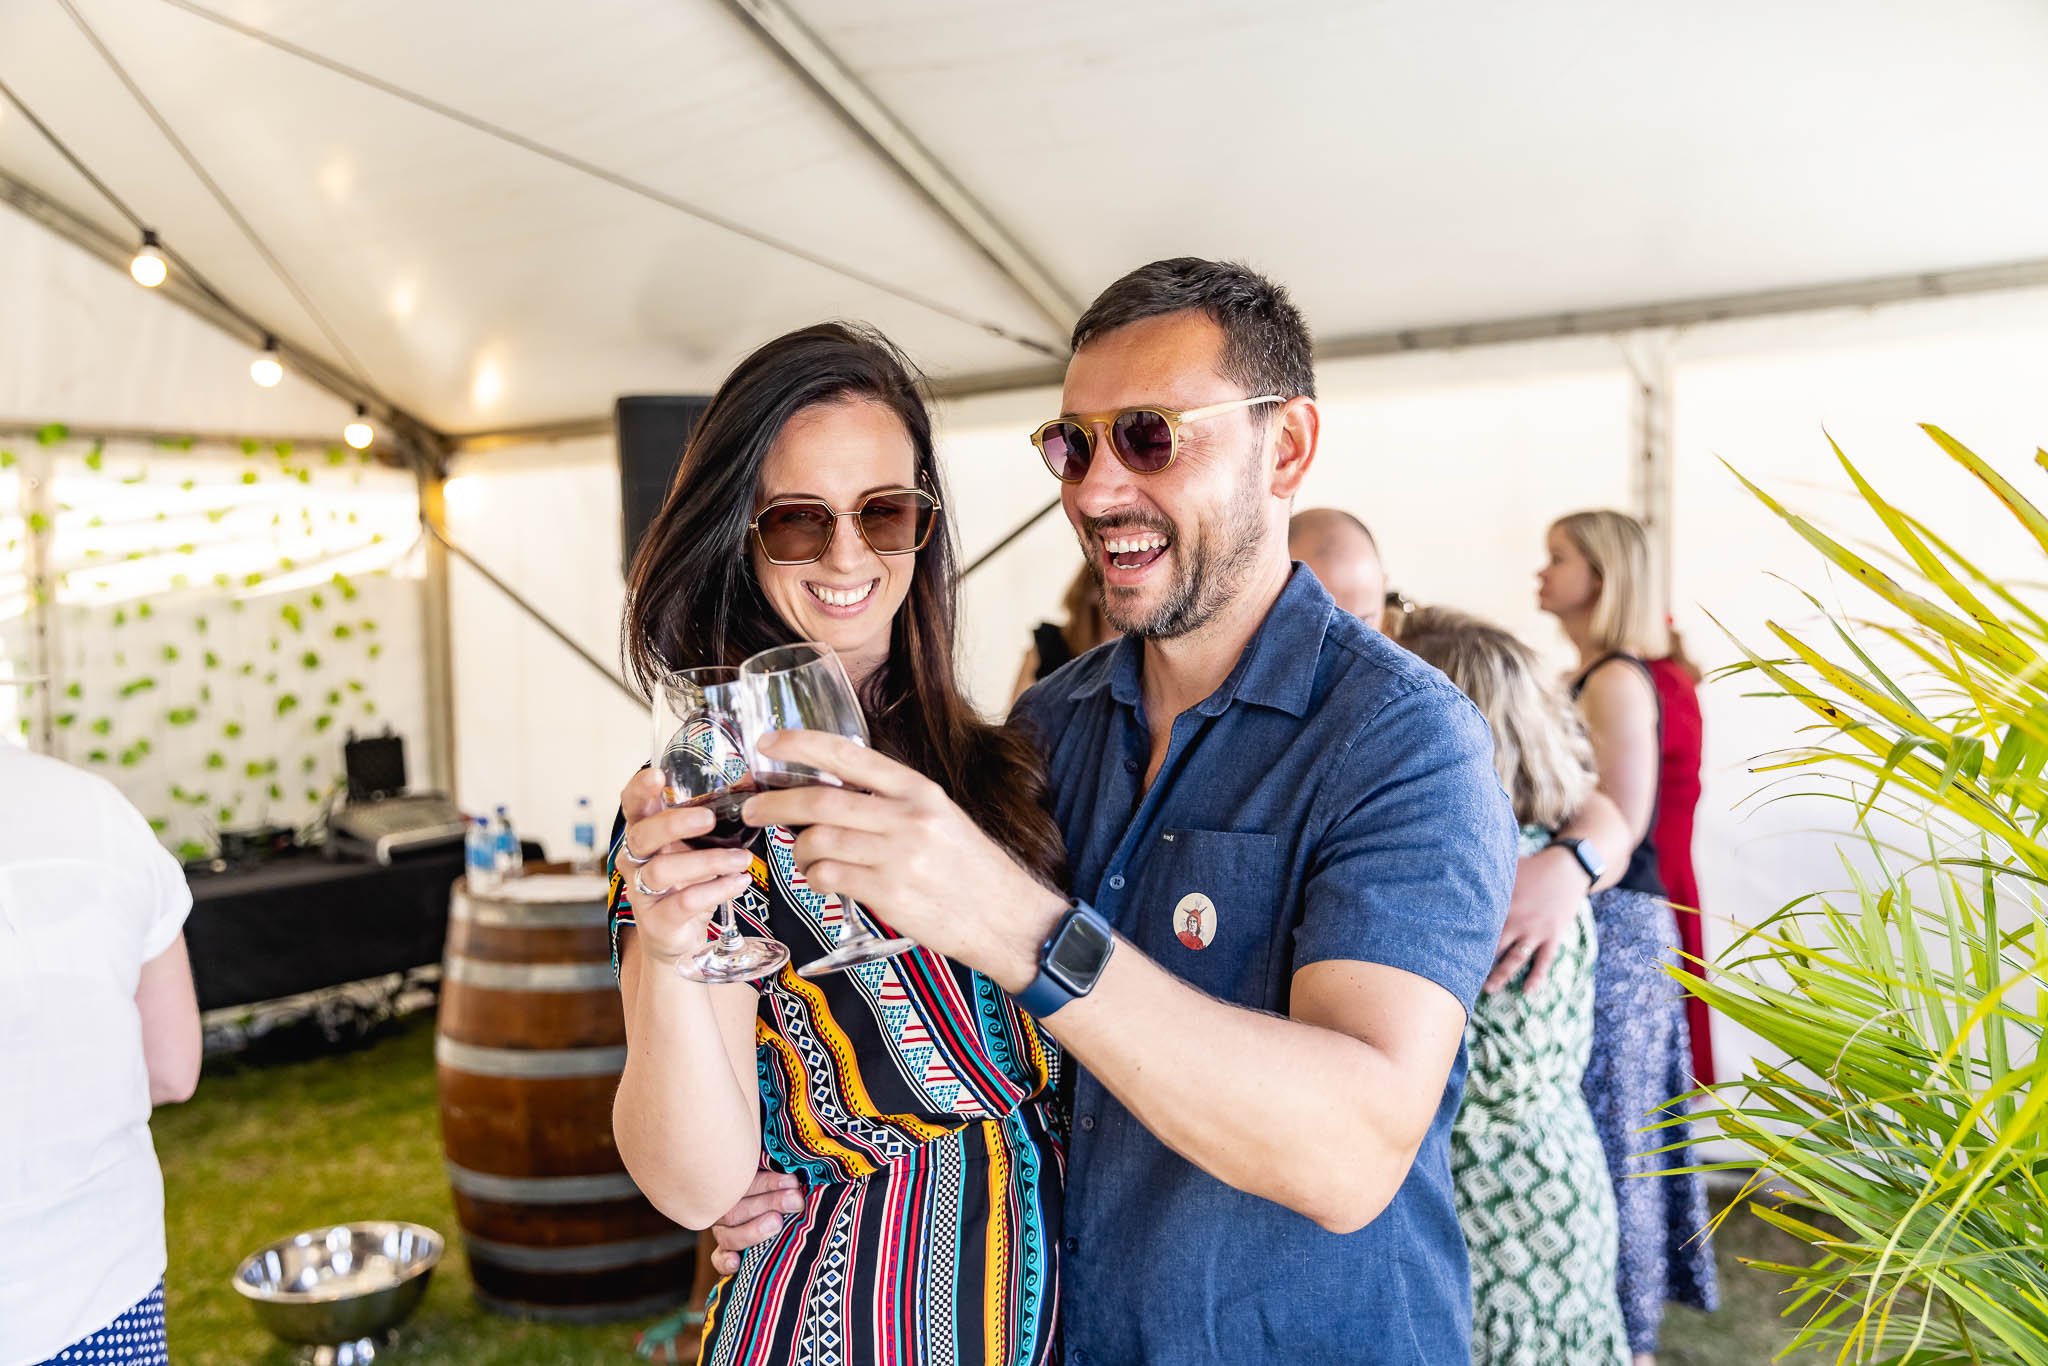 Ammon_Creative-Event_Photography-CMS_Events-UnWined_Subiaco-Image_06.jpg